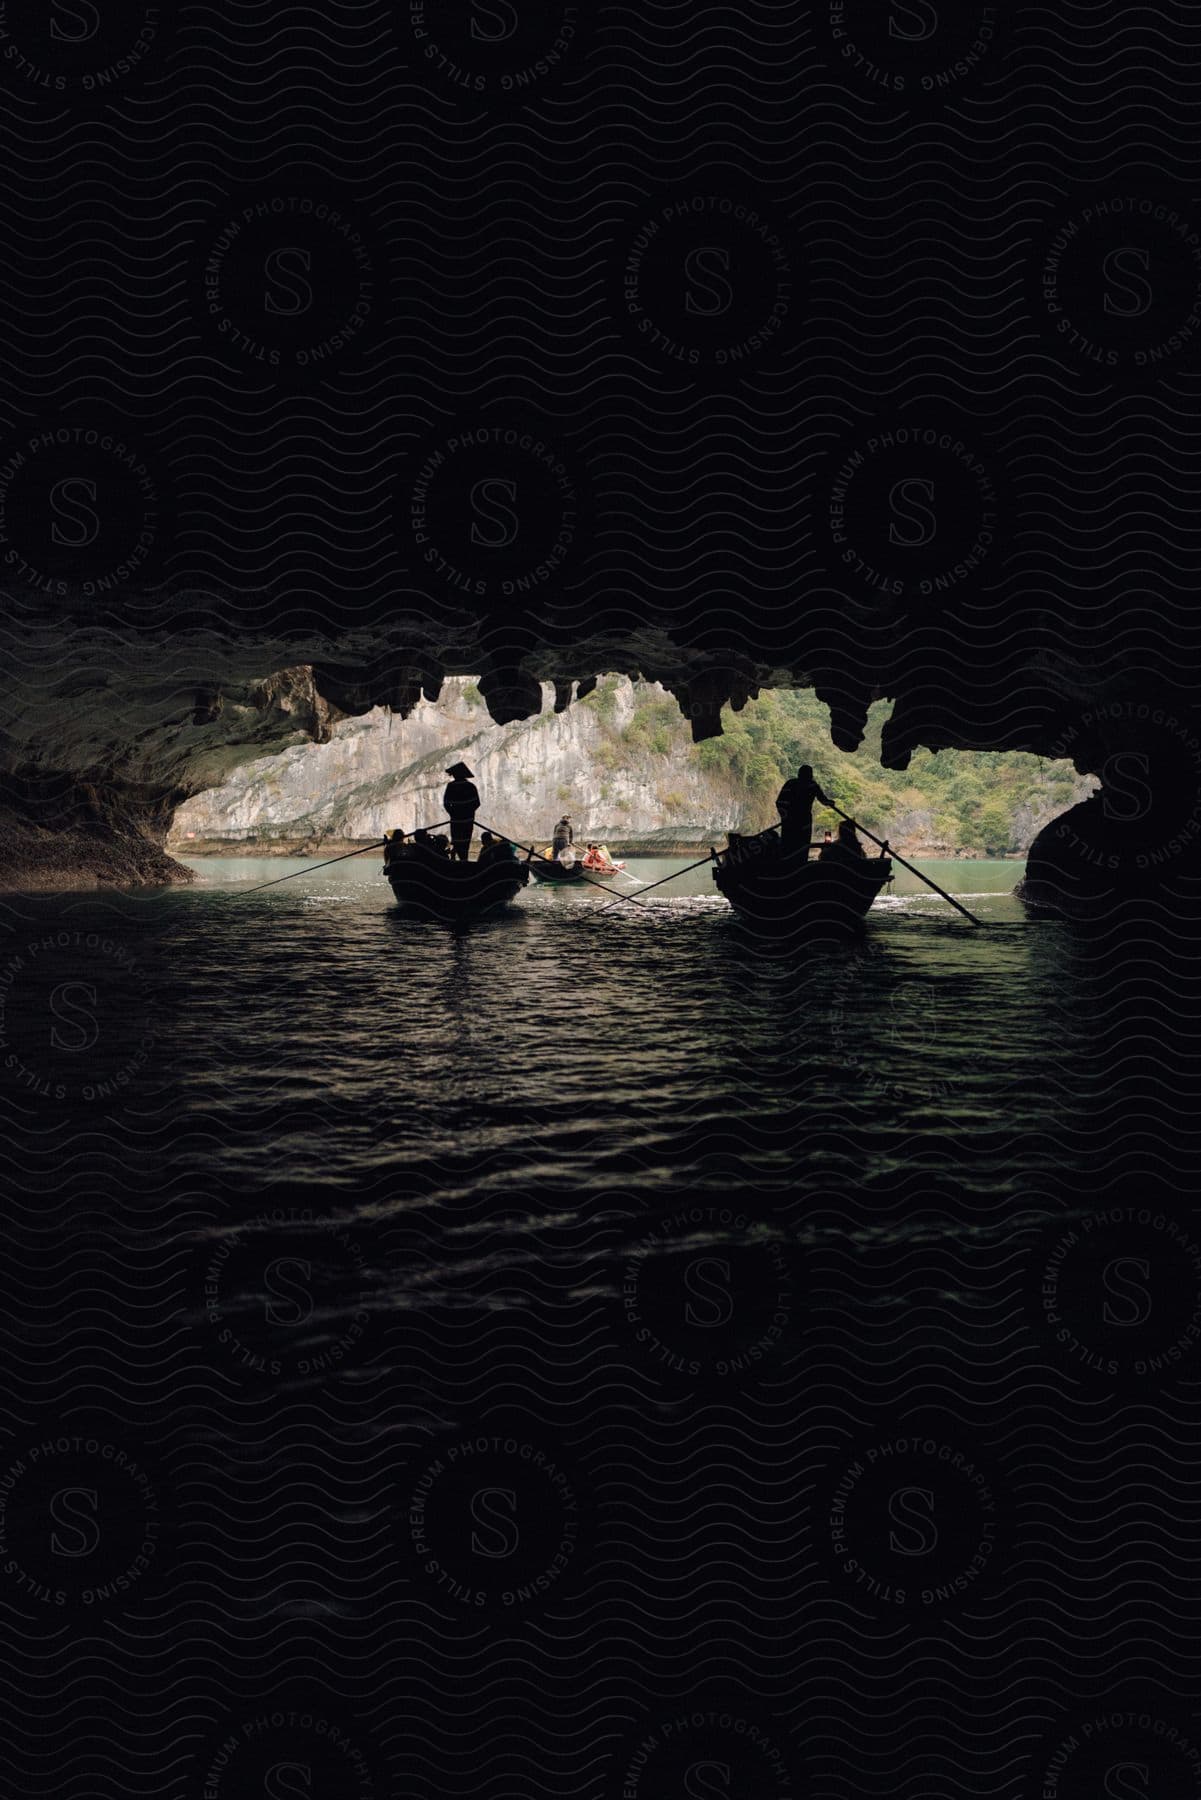 Silhouette of two boats with tourists passing by in a cave